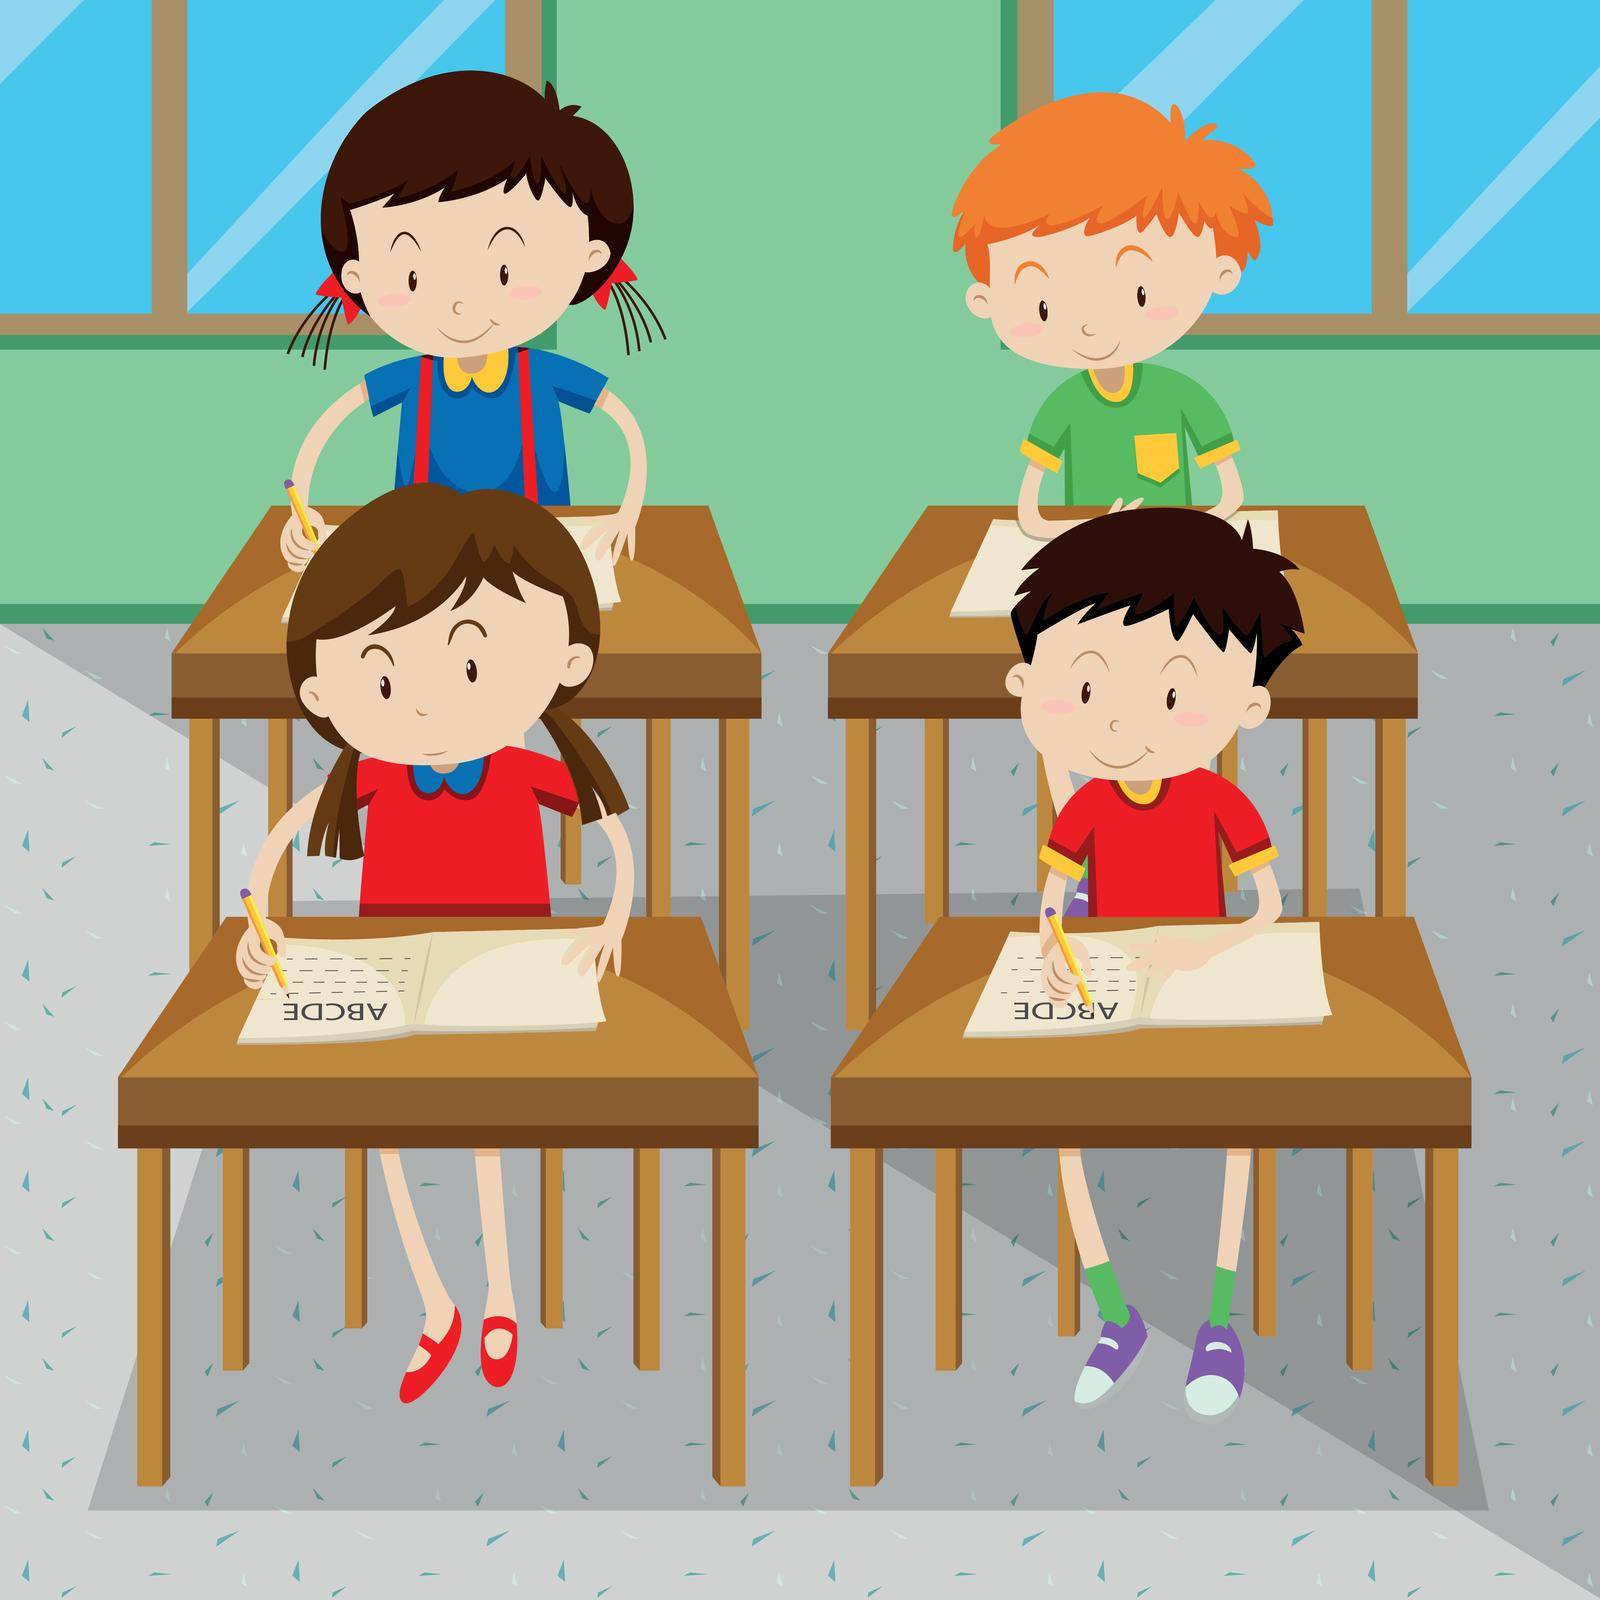 Students writing and learning at school illustration